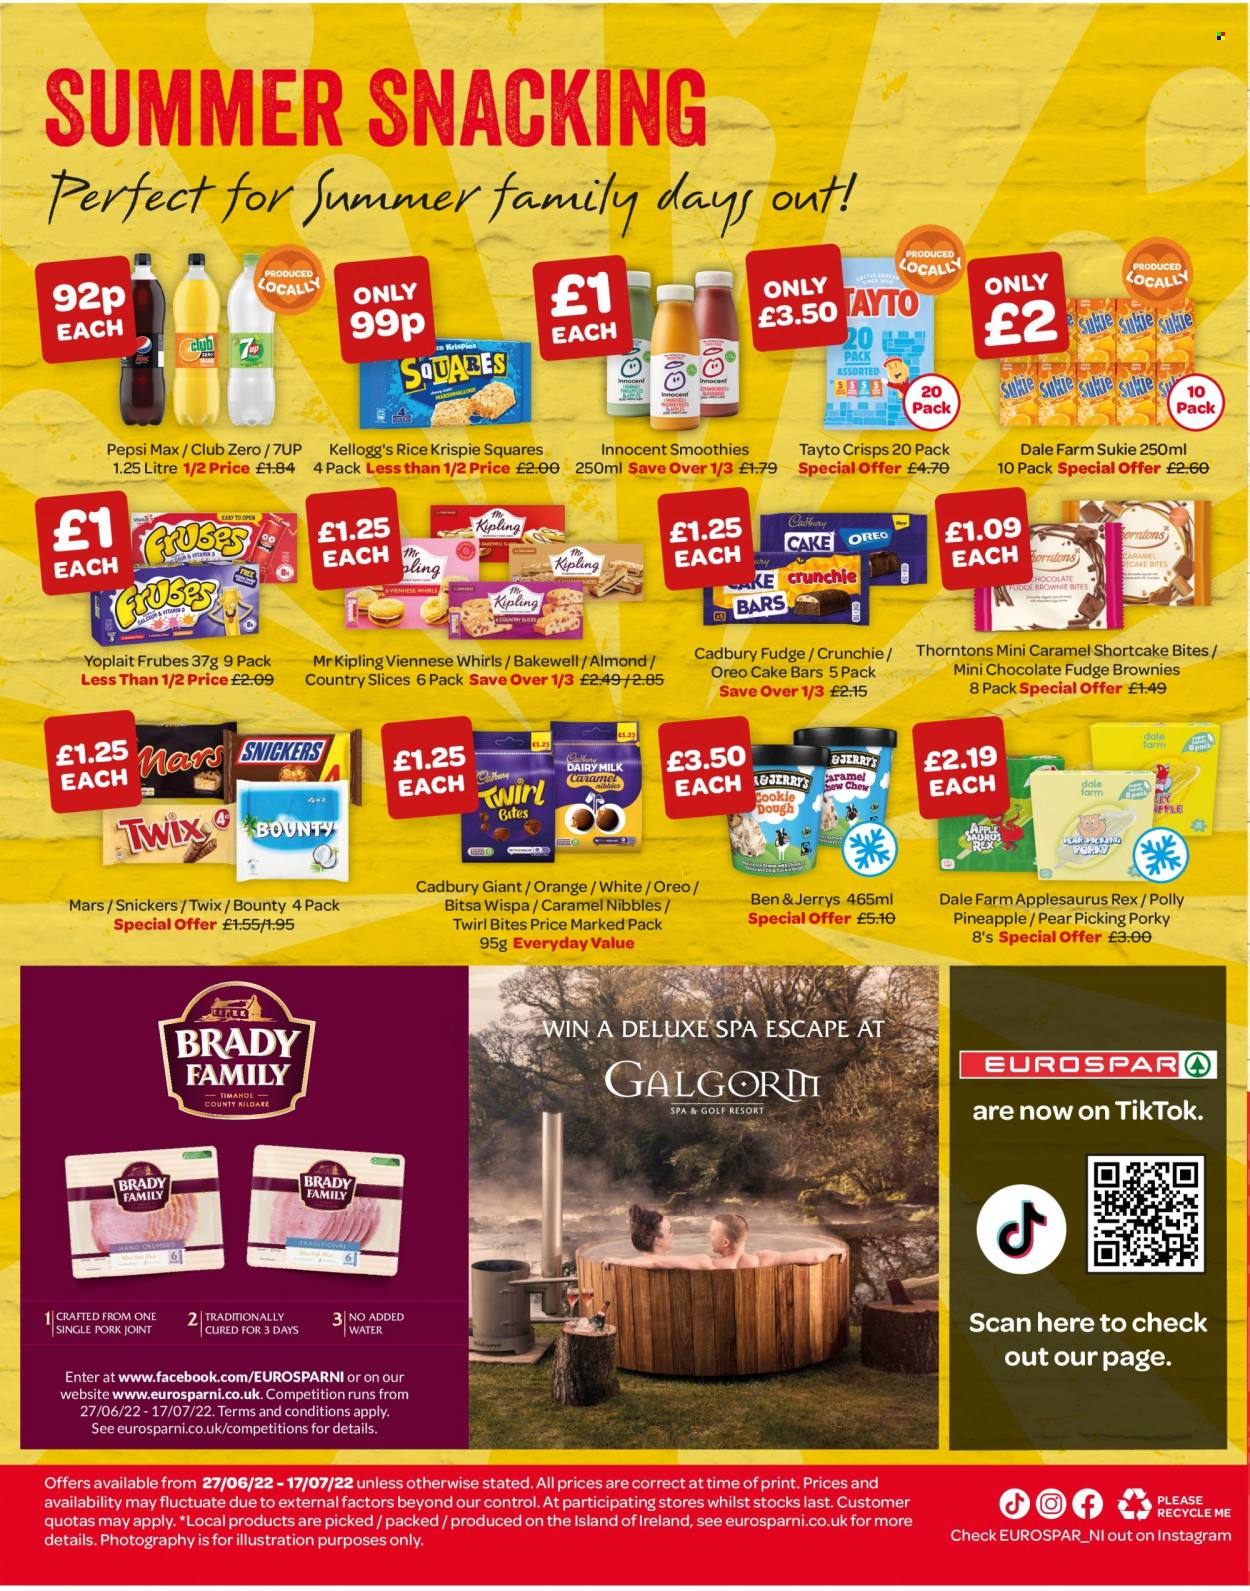 thumbnail - SPAR offer  - 27/06/2022 - 17/07/2022 - Sales products - pineapple, pears, cake, brownies, sausage, Oreo, Müller, Yoplait, Ben & Jerry's, fudge, chocolate, Snickers, Twix, Bounty, Mars, Cadbury, toffee, Kellogg's, Tayto, rice, caramel, oil, Pepsi, Pepsi Max, 7UP, Club Zero, smoothie, baby powder, Kleenex, Rex, Febreze, Fairy, Persil, Surf, body wash, shampoo, shower gel, L’Oréal, L’Oréal Men, conditioner, VO5, body lotion, anti-perspirant, Sure, animal food, dog food, Winalot, Bakers, dry dog food. Page 6.